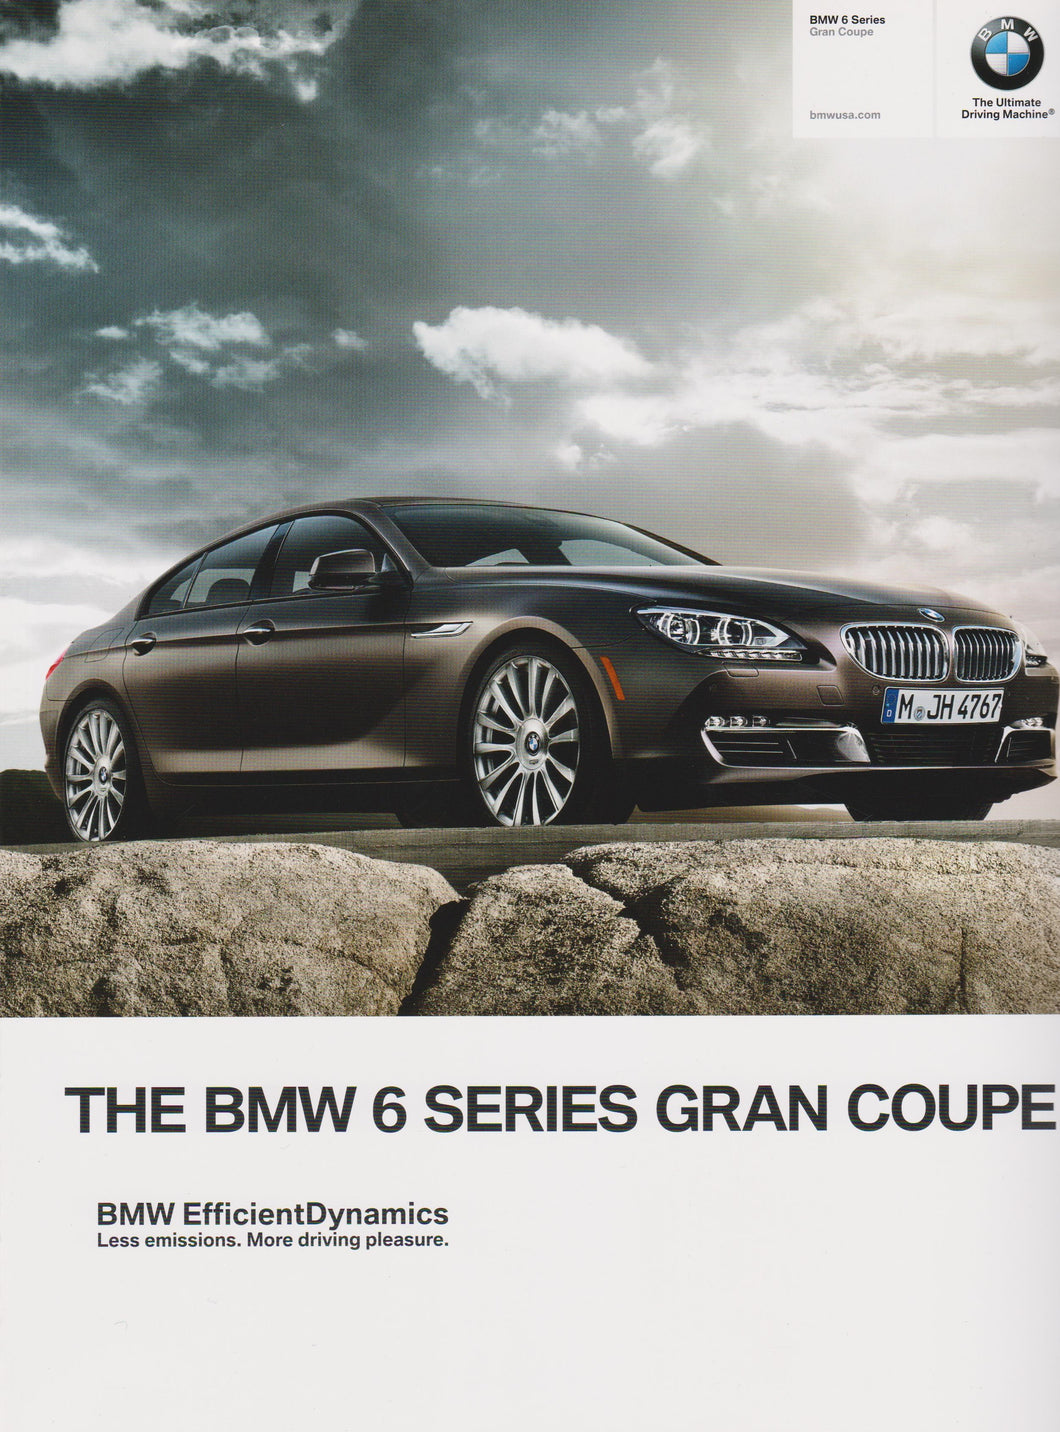 Brochure - The BMW 6 Series Gran Coupe.  - 2014 F13 Brochure